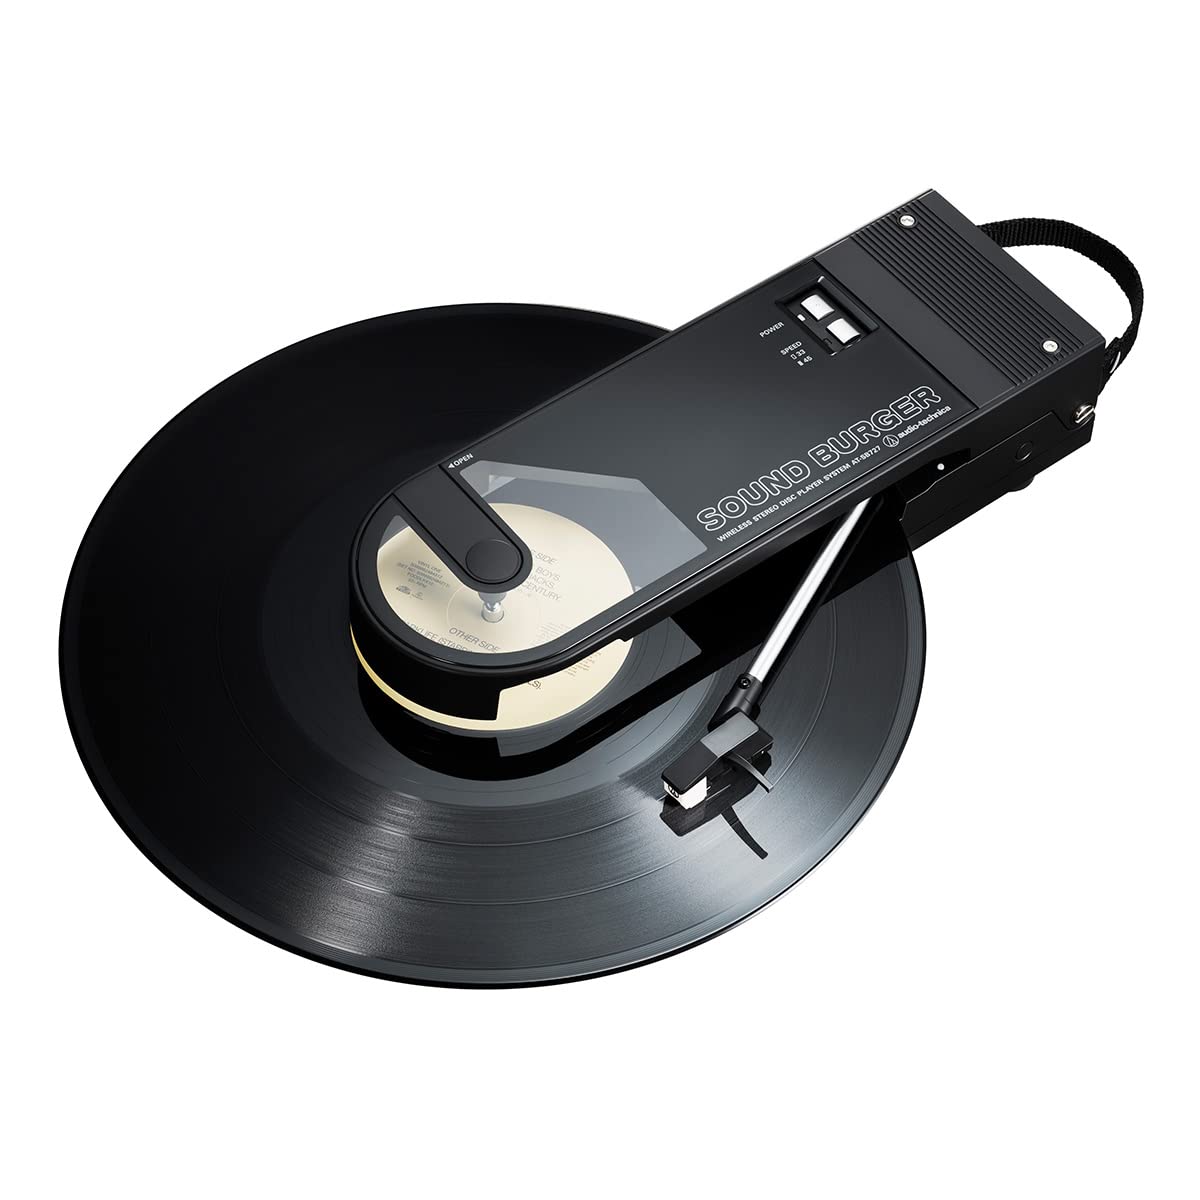 AudioTechnica AT-SB727 Sound Burger Portable Turntable with Bluetooth (Black)…